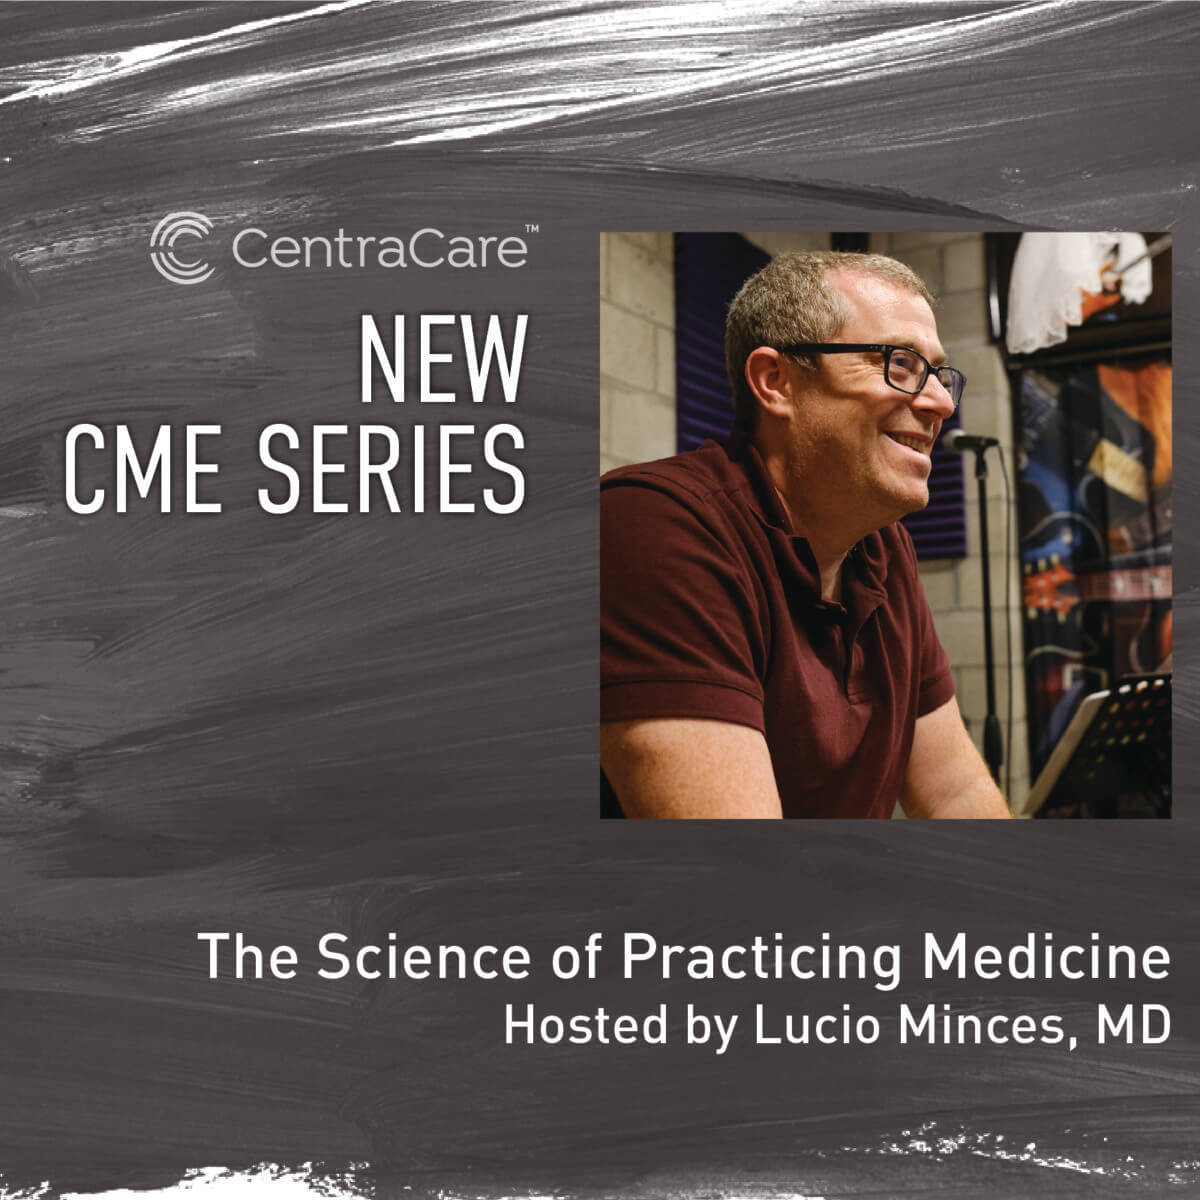 Podcast cover for the Science of Practicing Medicine CME series